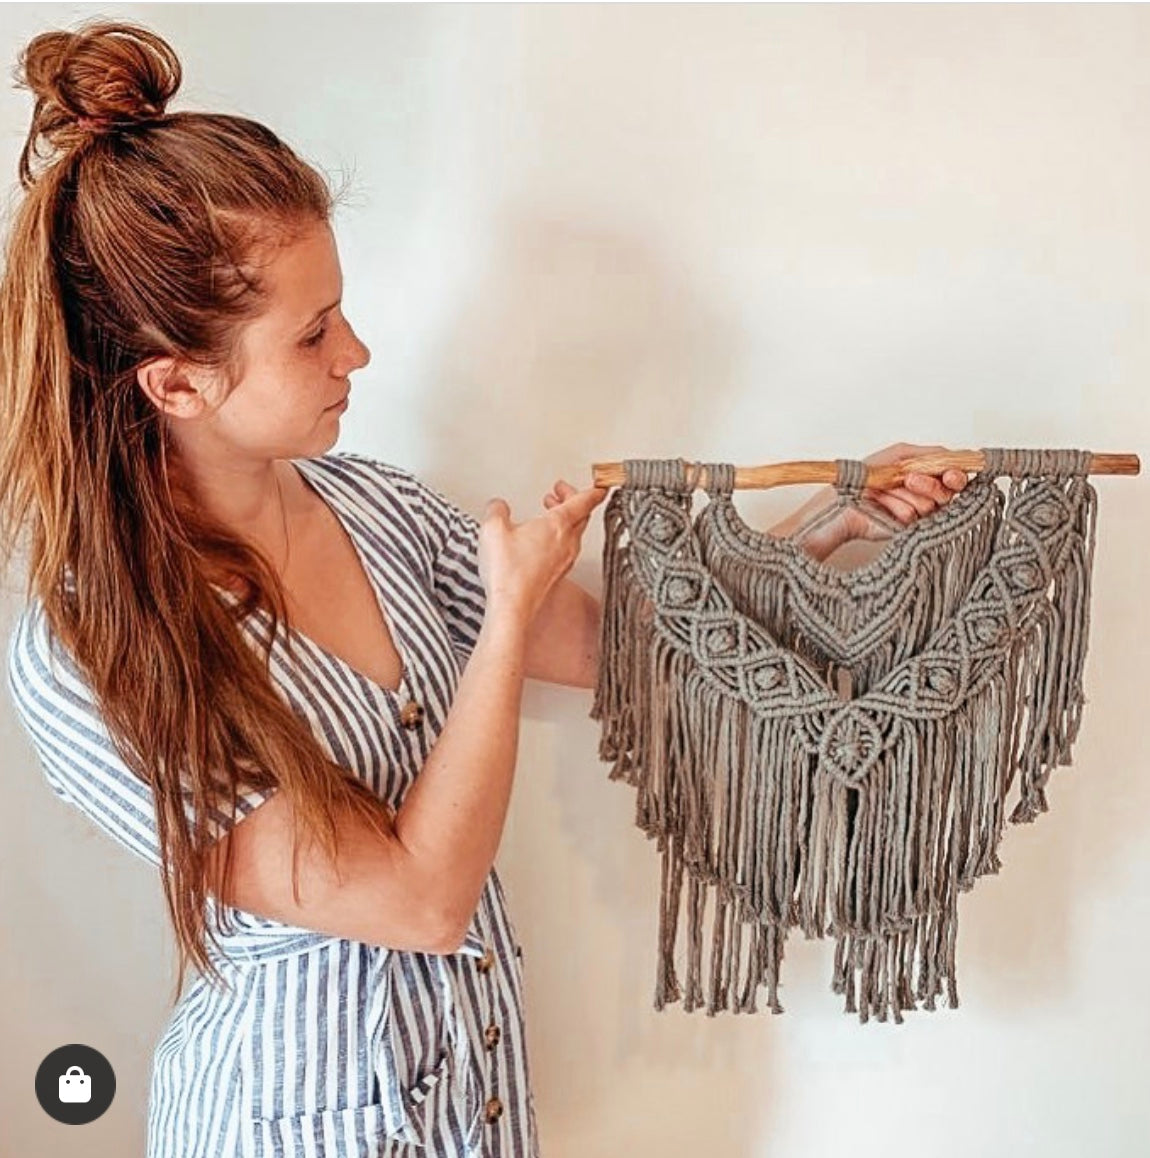 My passion for macrame